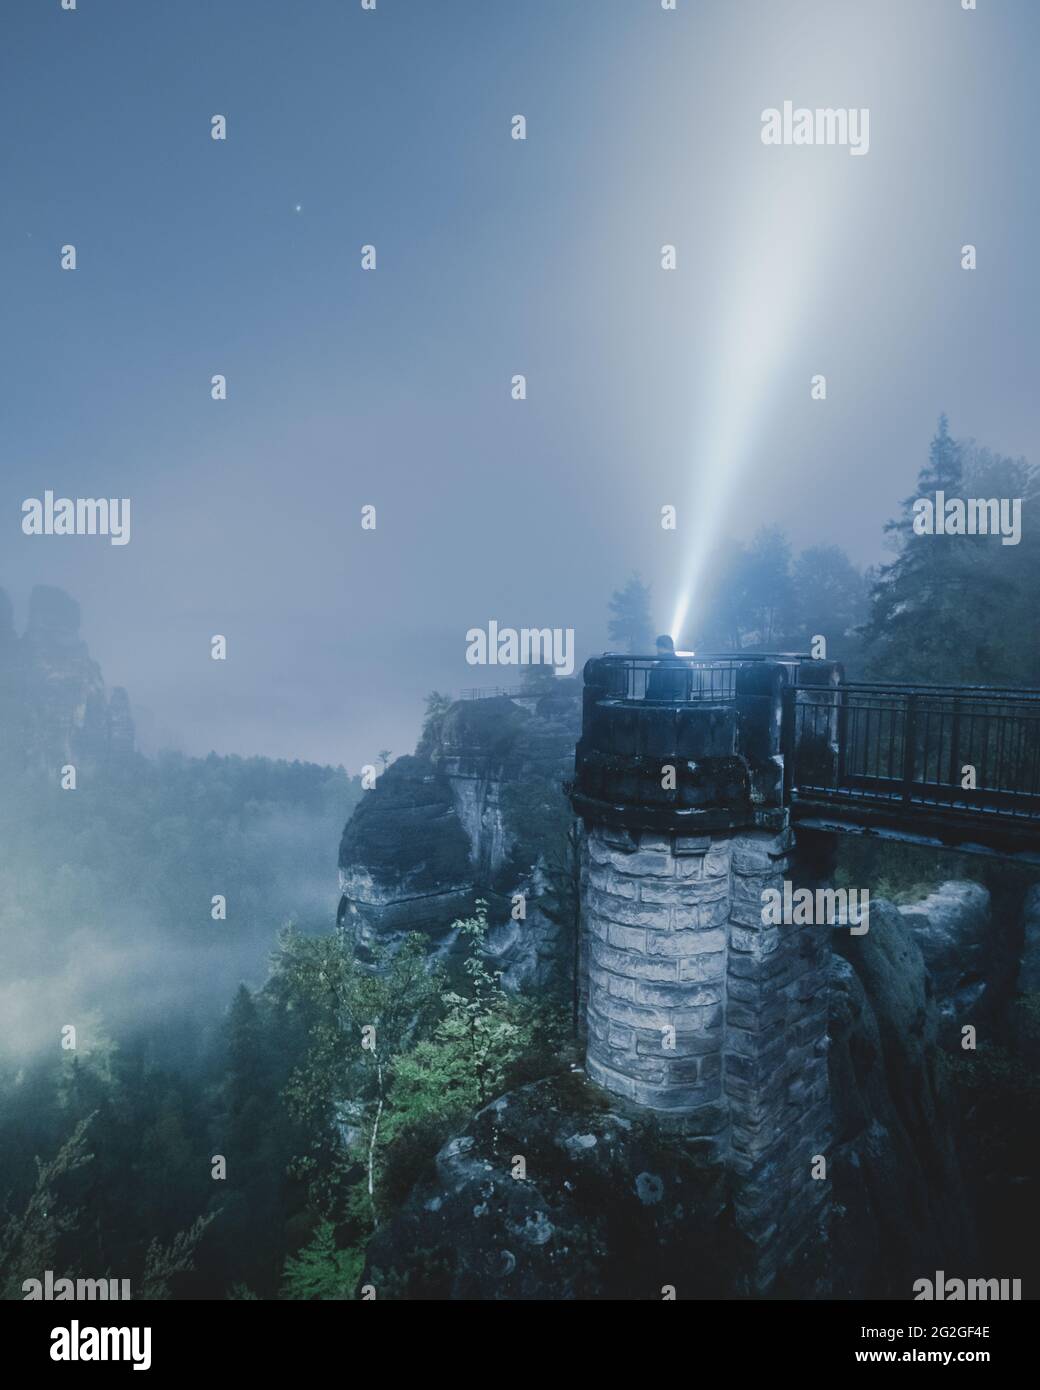 Nocturnal view from the Bastei bridge in the misty Elbe Sandstone Mountains. Stock Photo